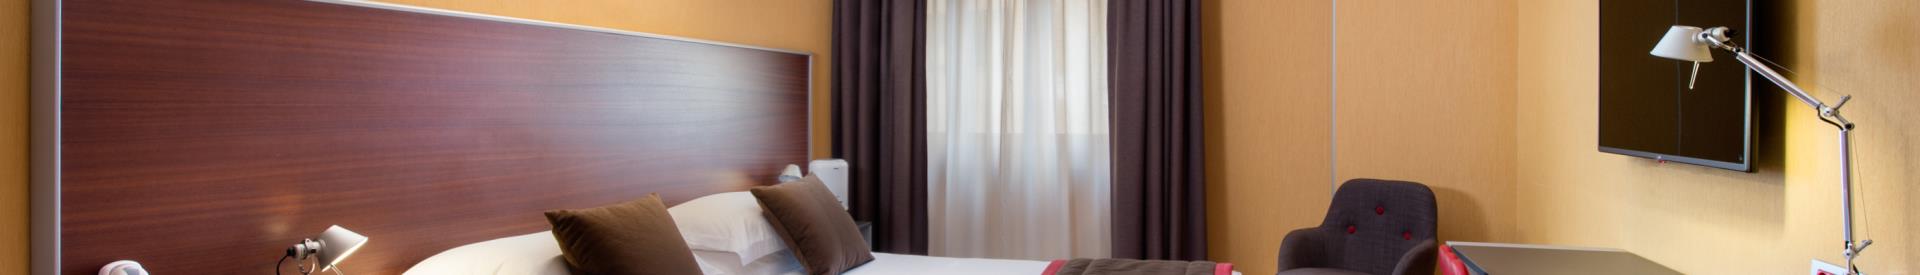 Book your room at the Best Western Plus City Hotel Genoa